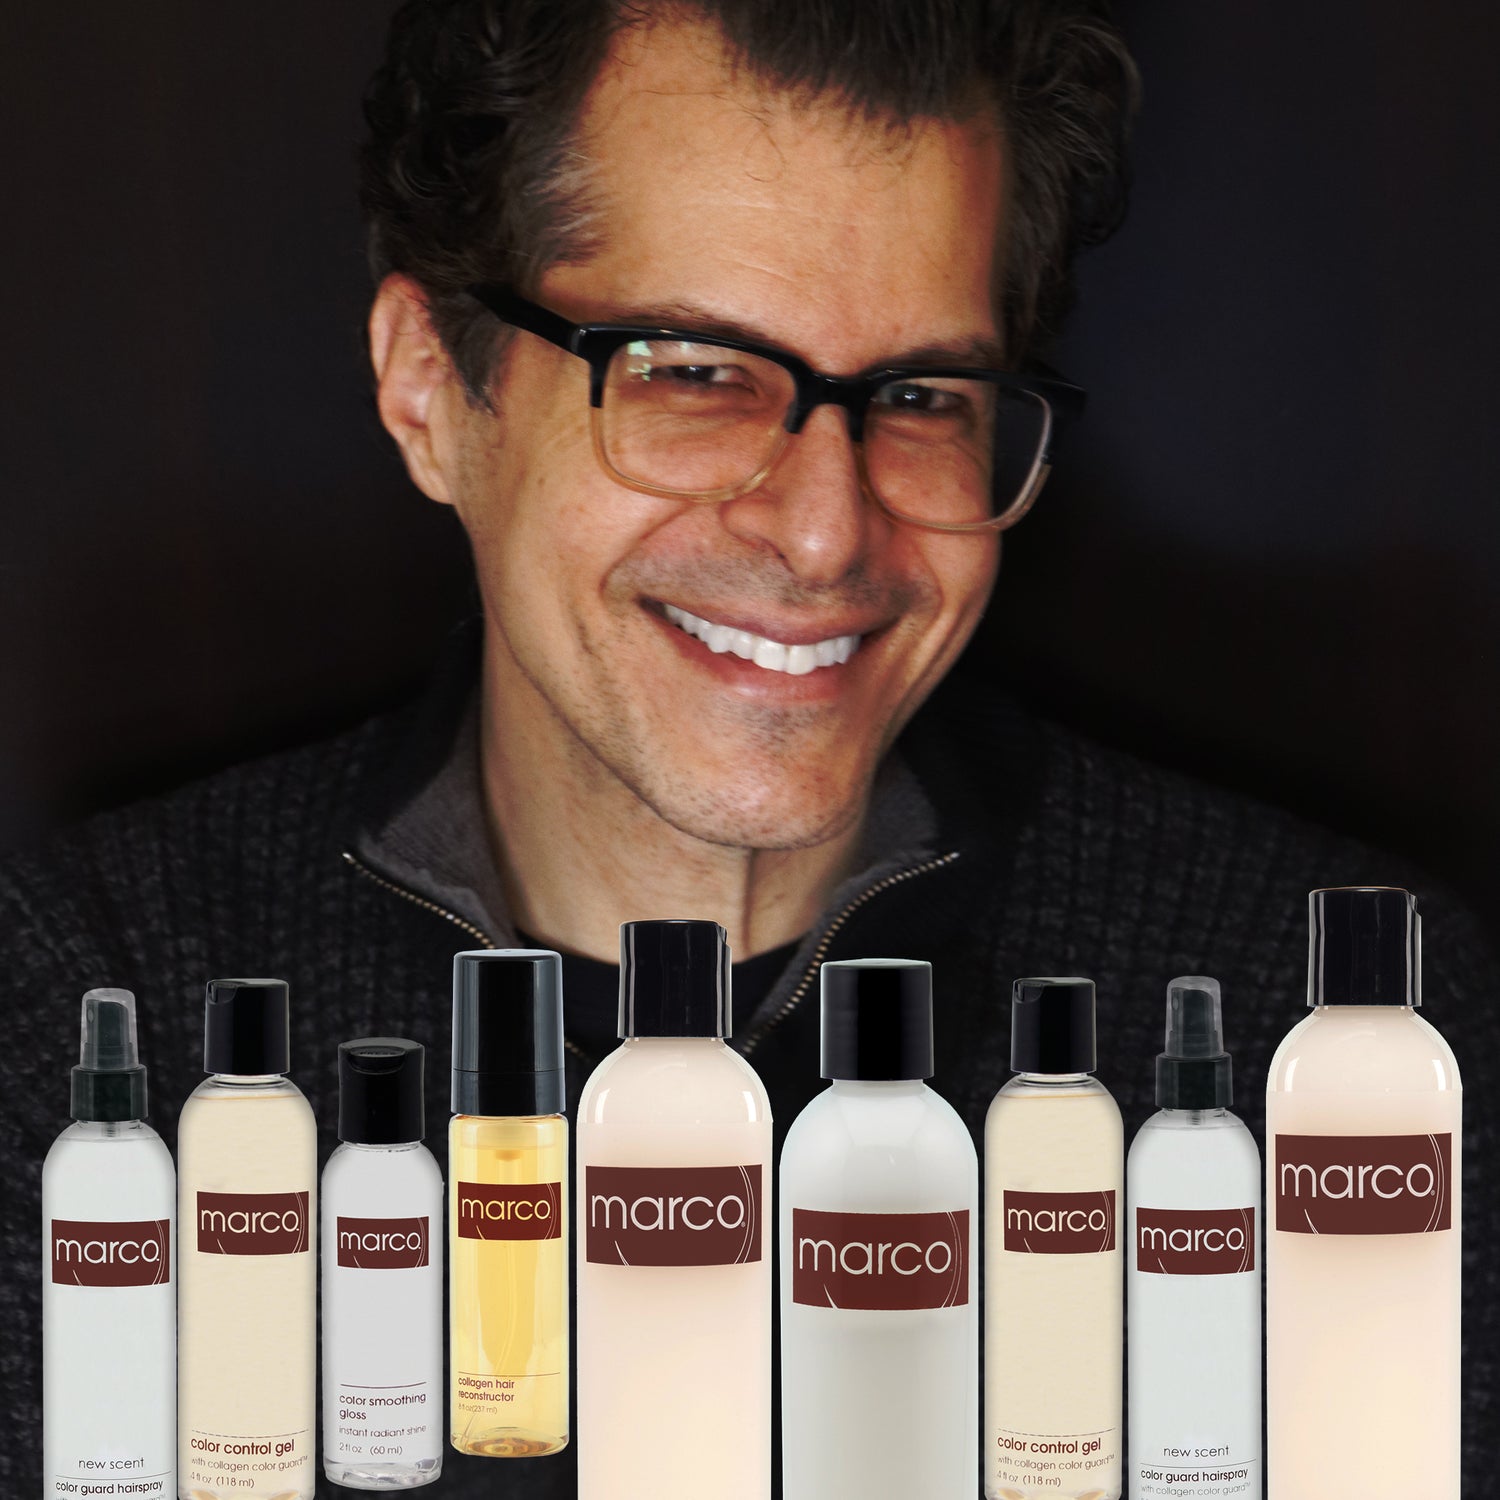 Marco Pelusi, dark hair, glasses, smiles behind his full collection of collagen hair care products